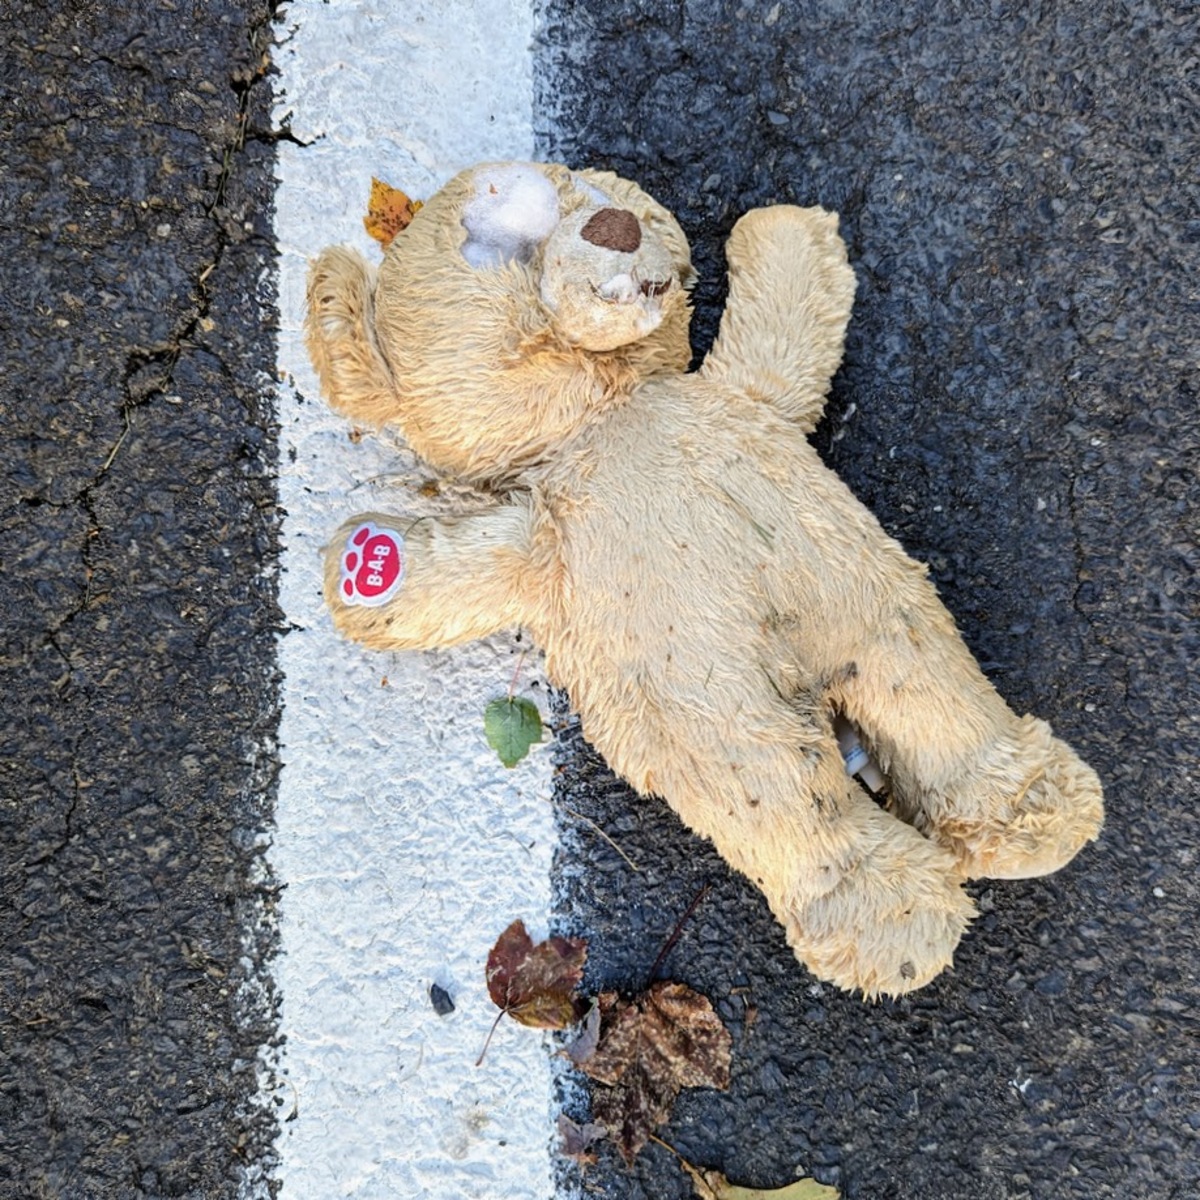 A teddy bear, missing its eyes, laying in the middle of the road.